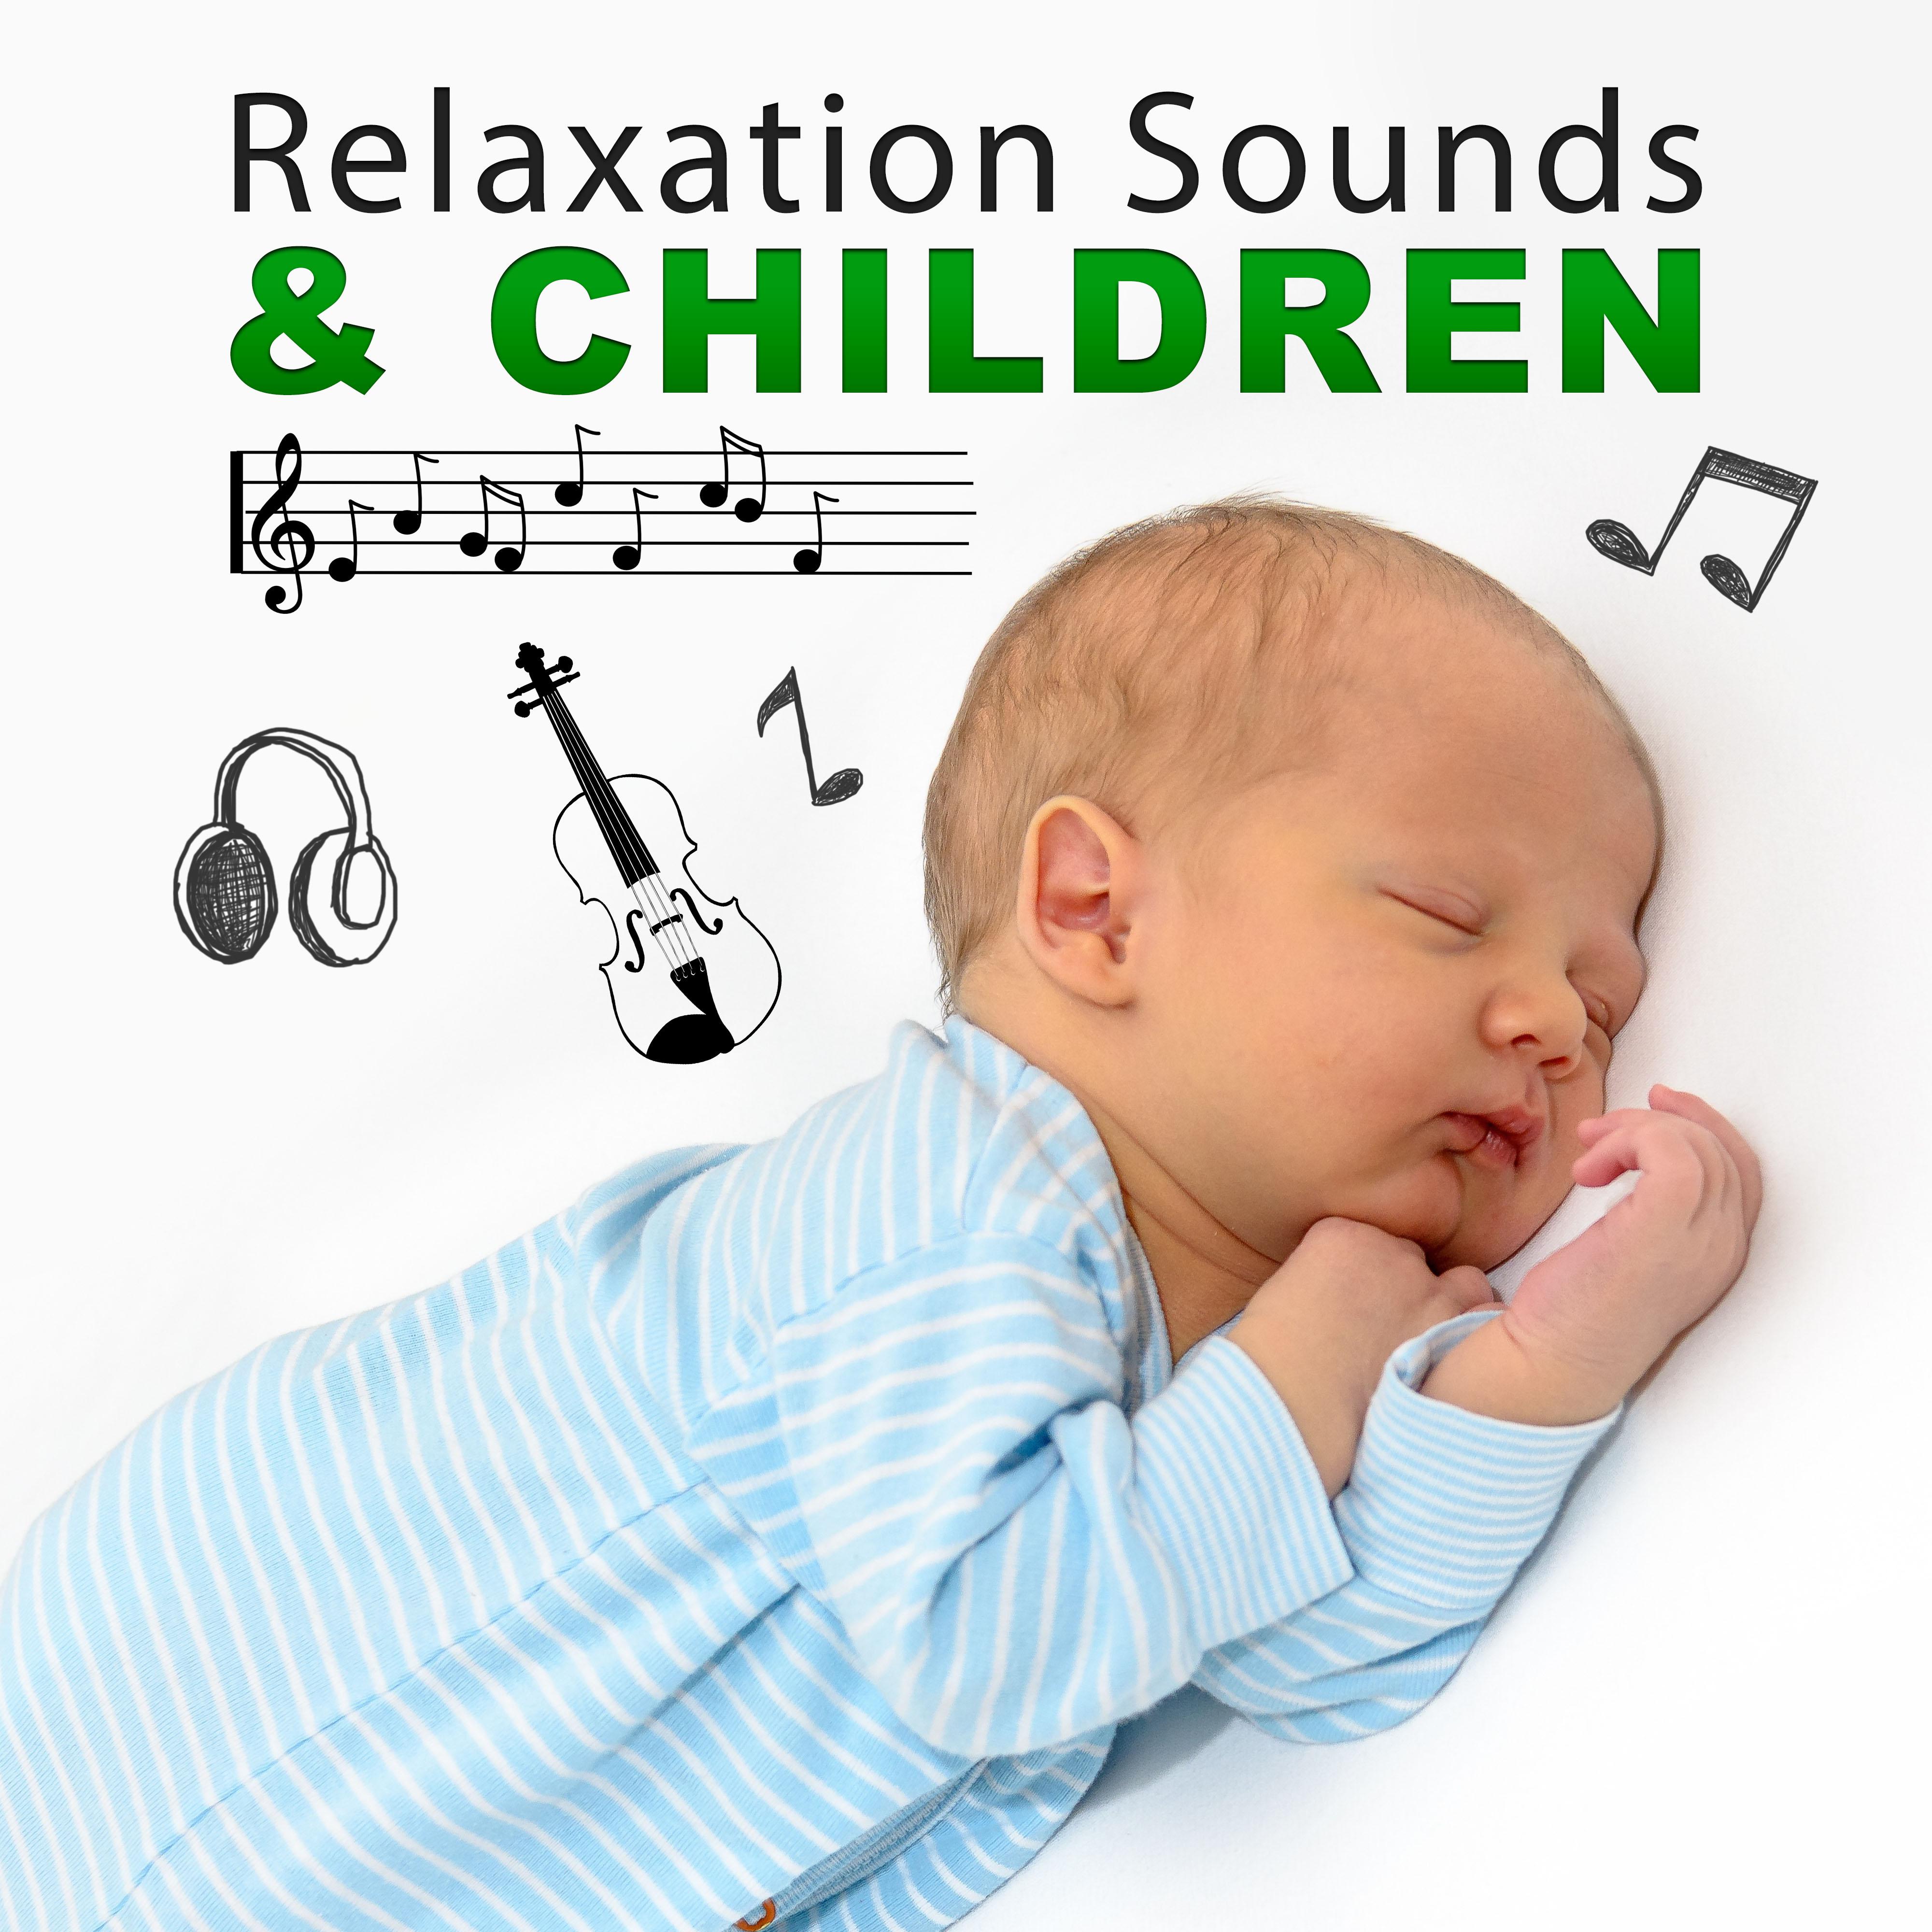 Relaxation Sounds  Children  Classical Songs for Kids, Relaxation Melodies for Your Baby, Music with Mozart